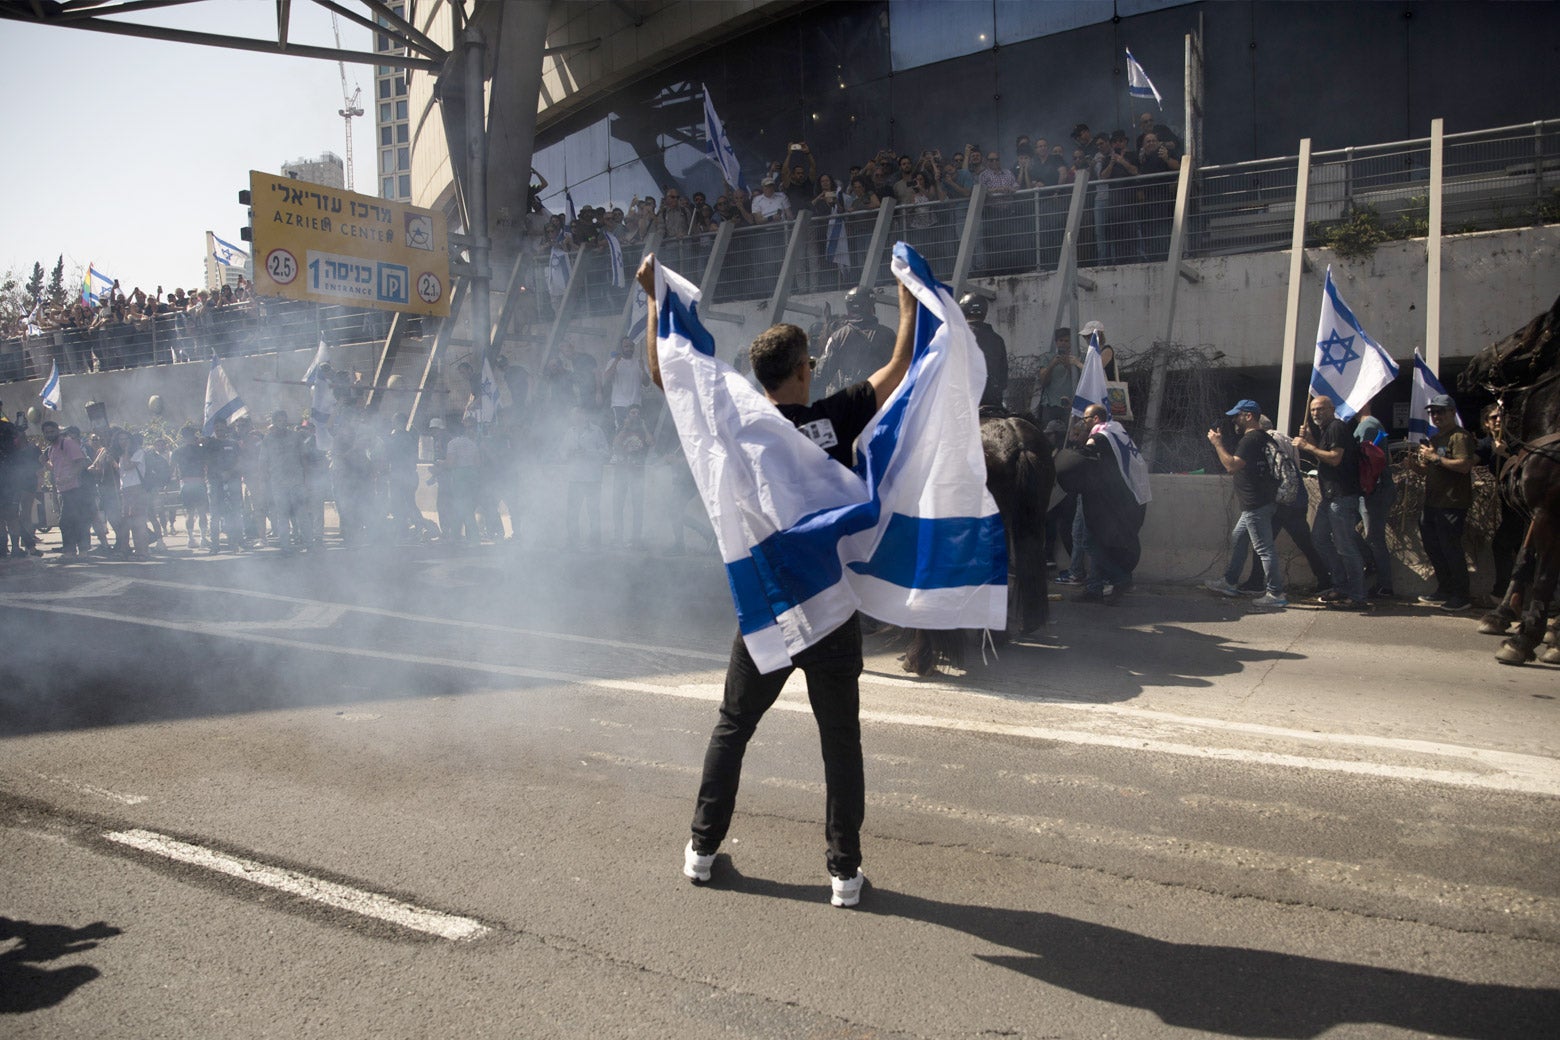 An Israeli protester waves the Israeli flag during clashes with Israeli police officers in a demonstration against the Israeli government's judicial reform plan on March 1, 2023 in Tel Aviv, Israel. Smoke rises around him.